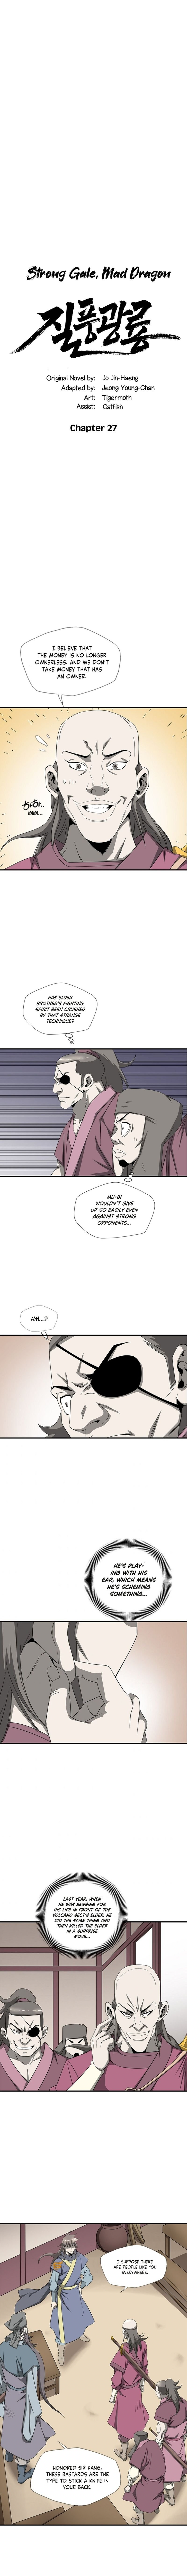 Strong Gale, Mad Dragon - Page 2